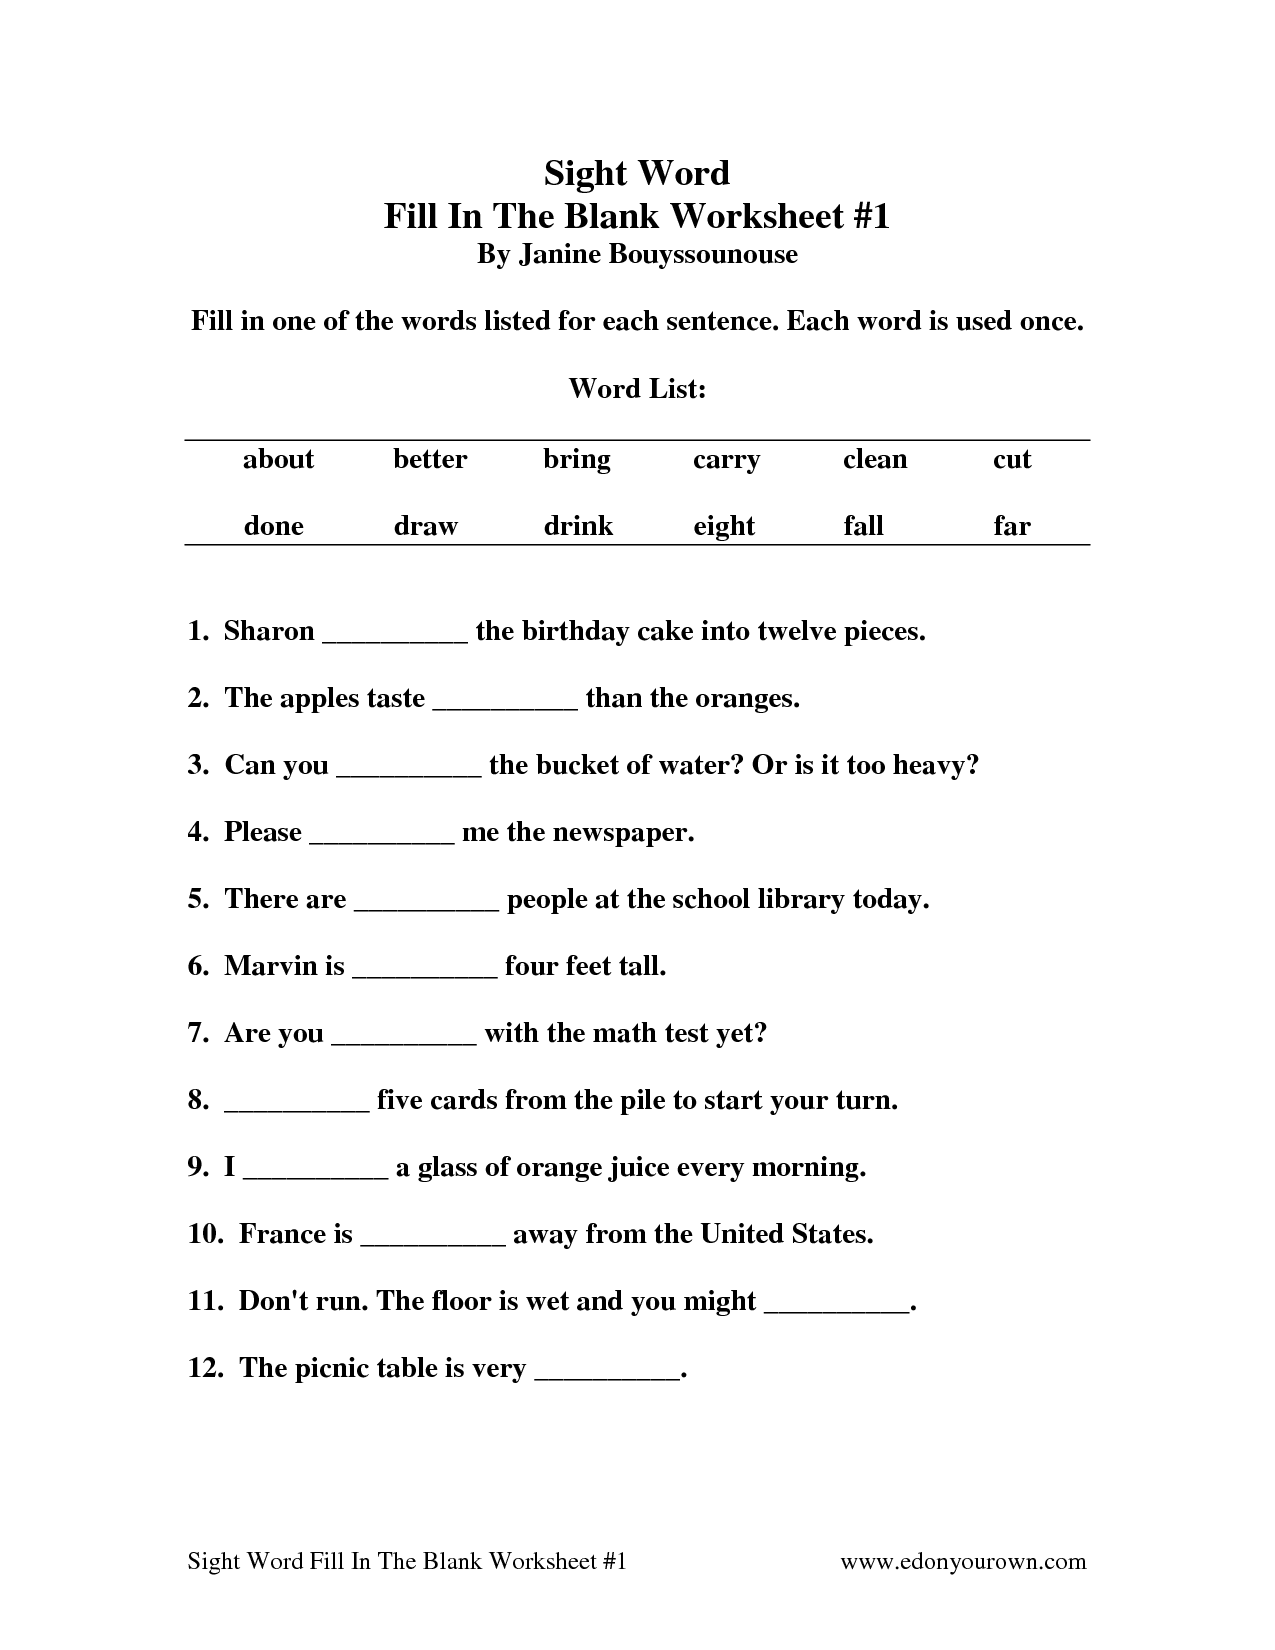 19 Fill In The Blank Sight Word Worksheets Worksheeto